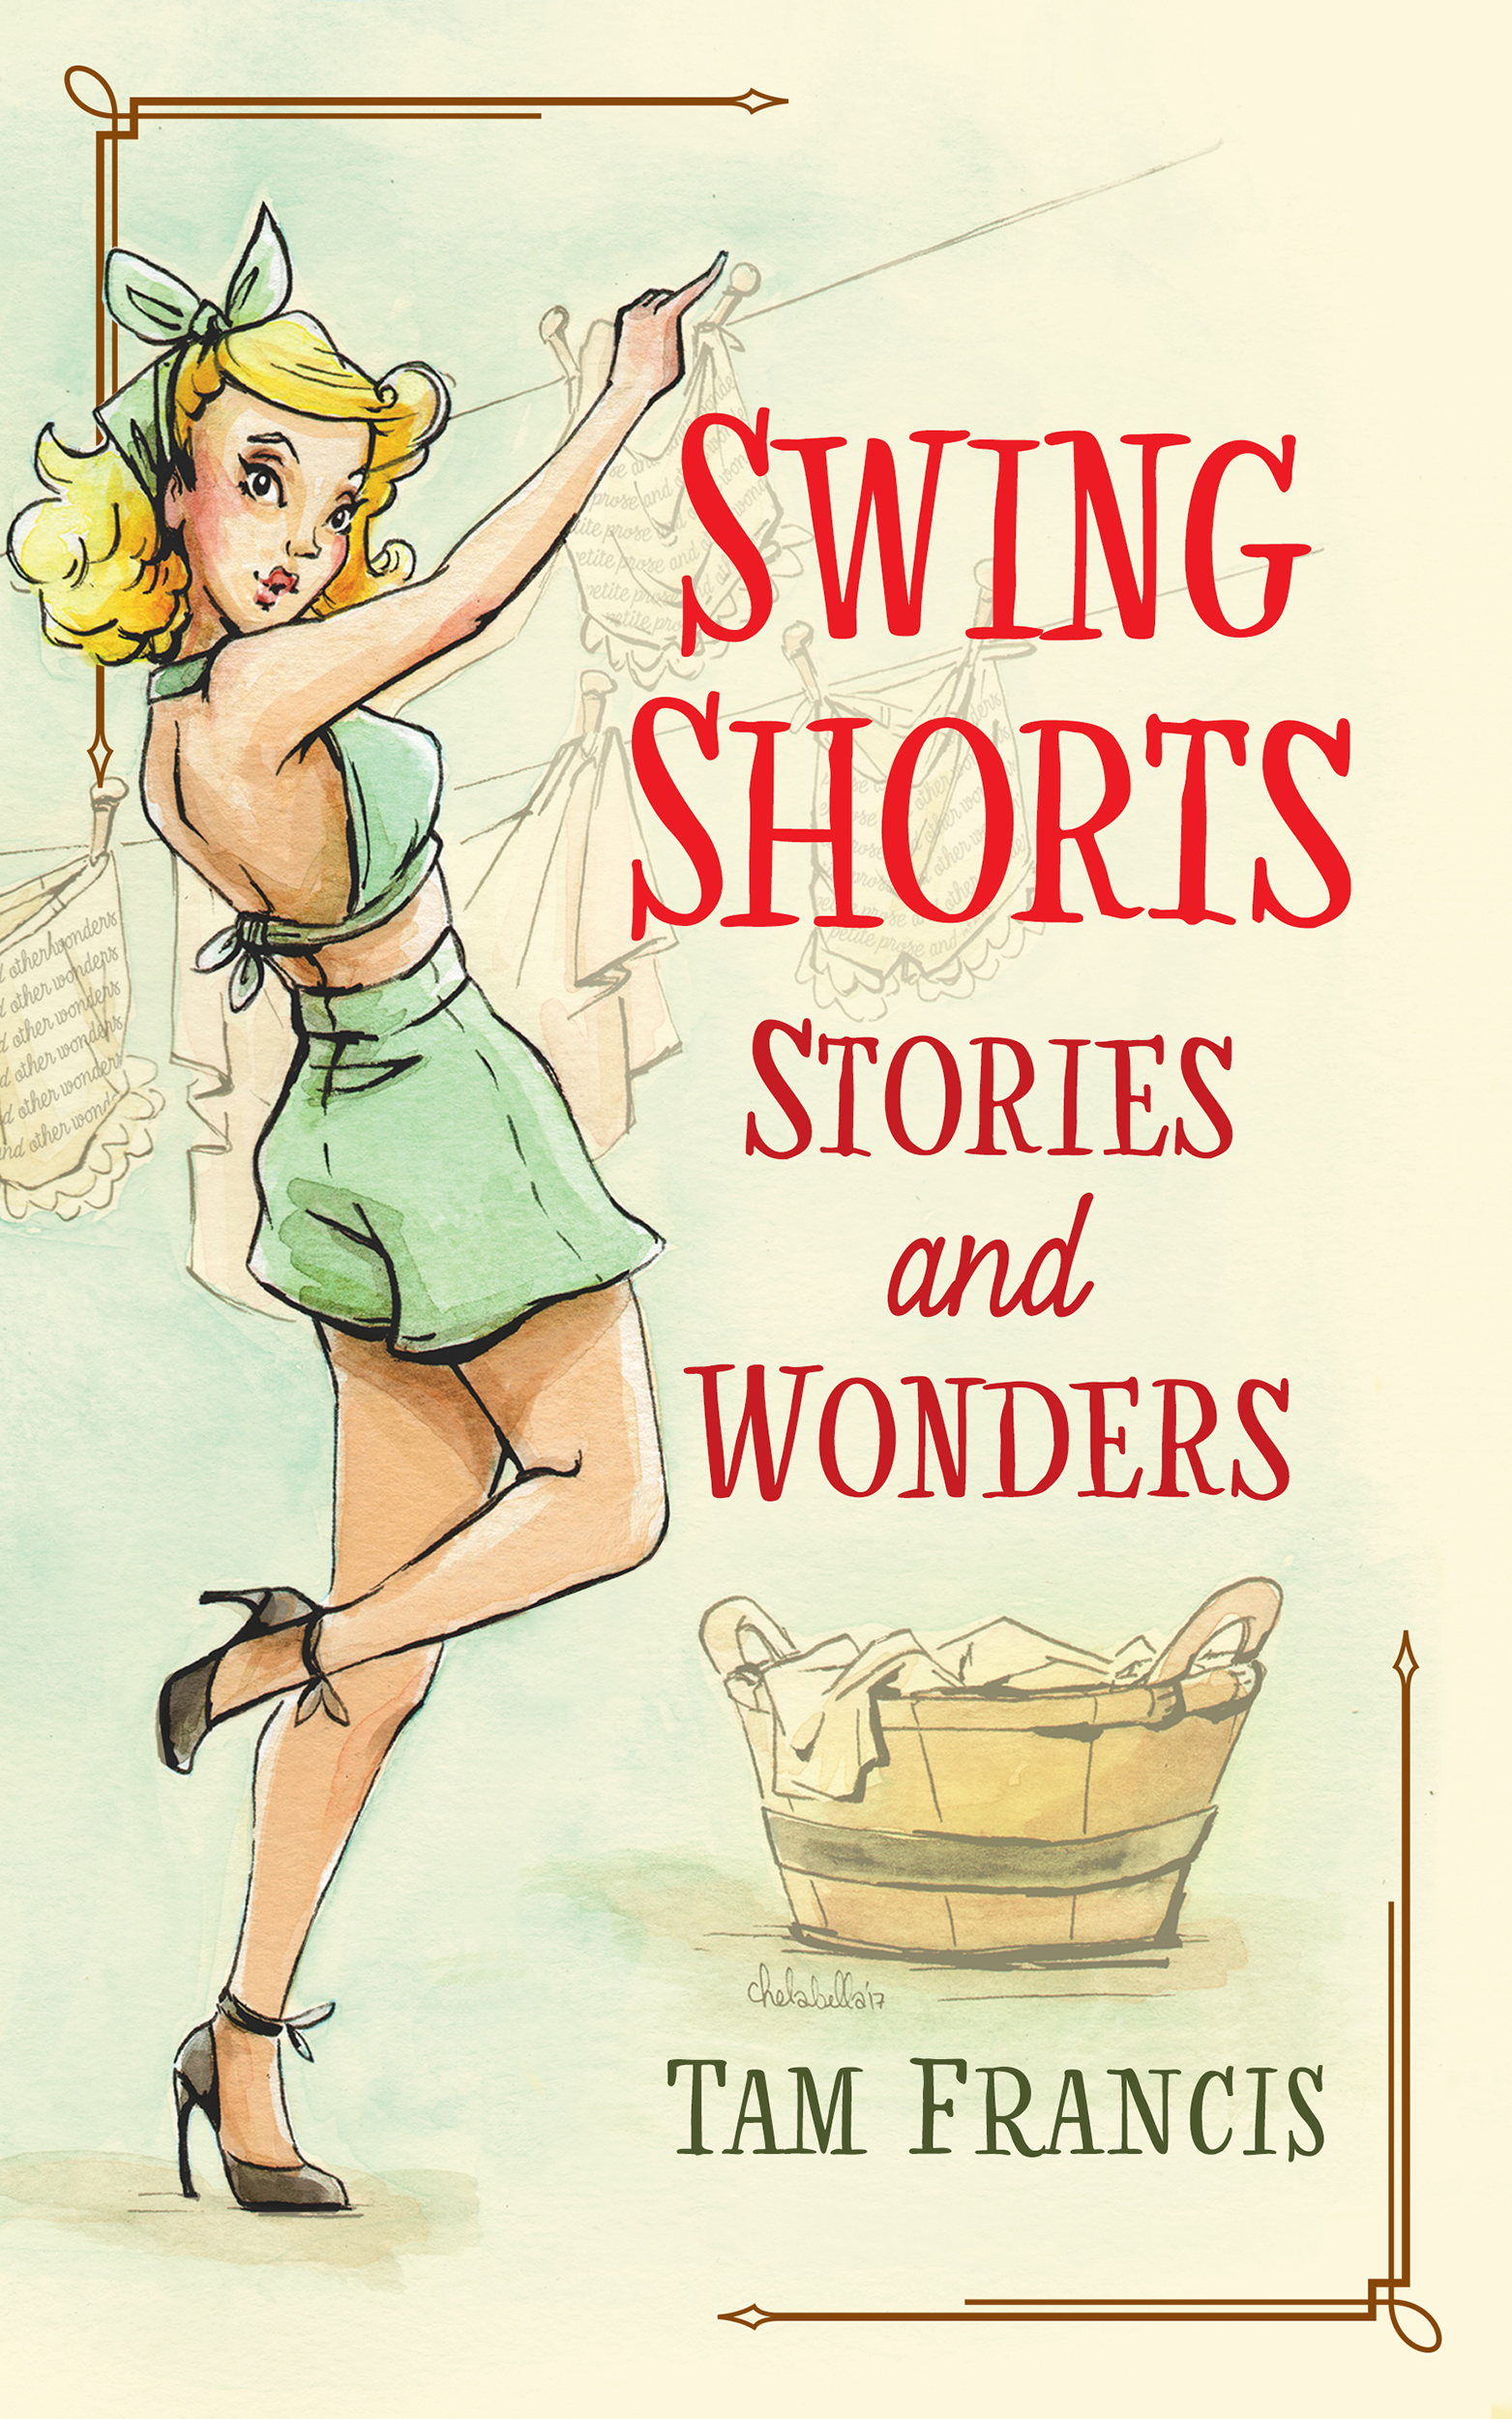 Swing Shorts: Buy Now for Kindle at Amazon!